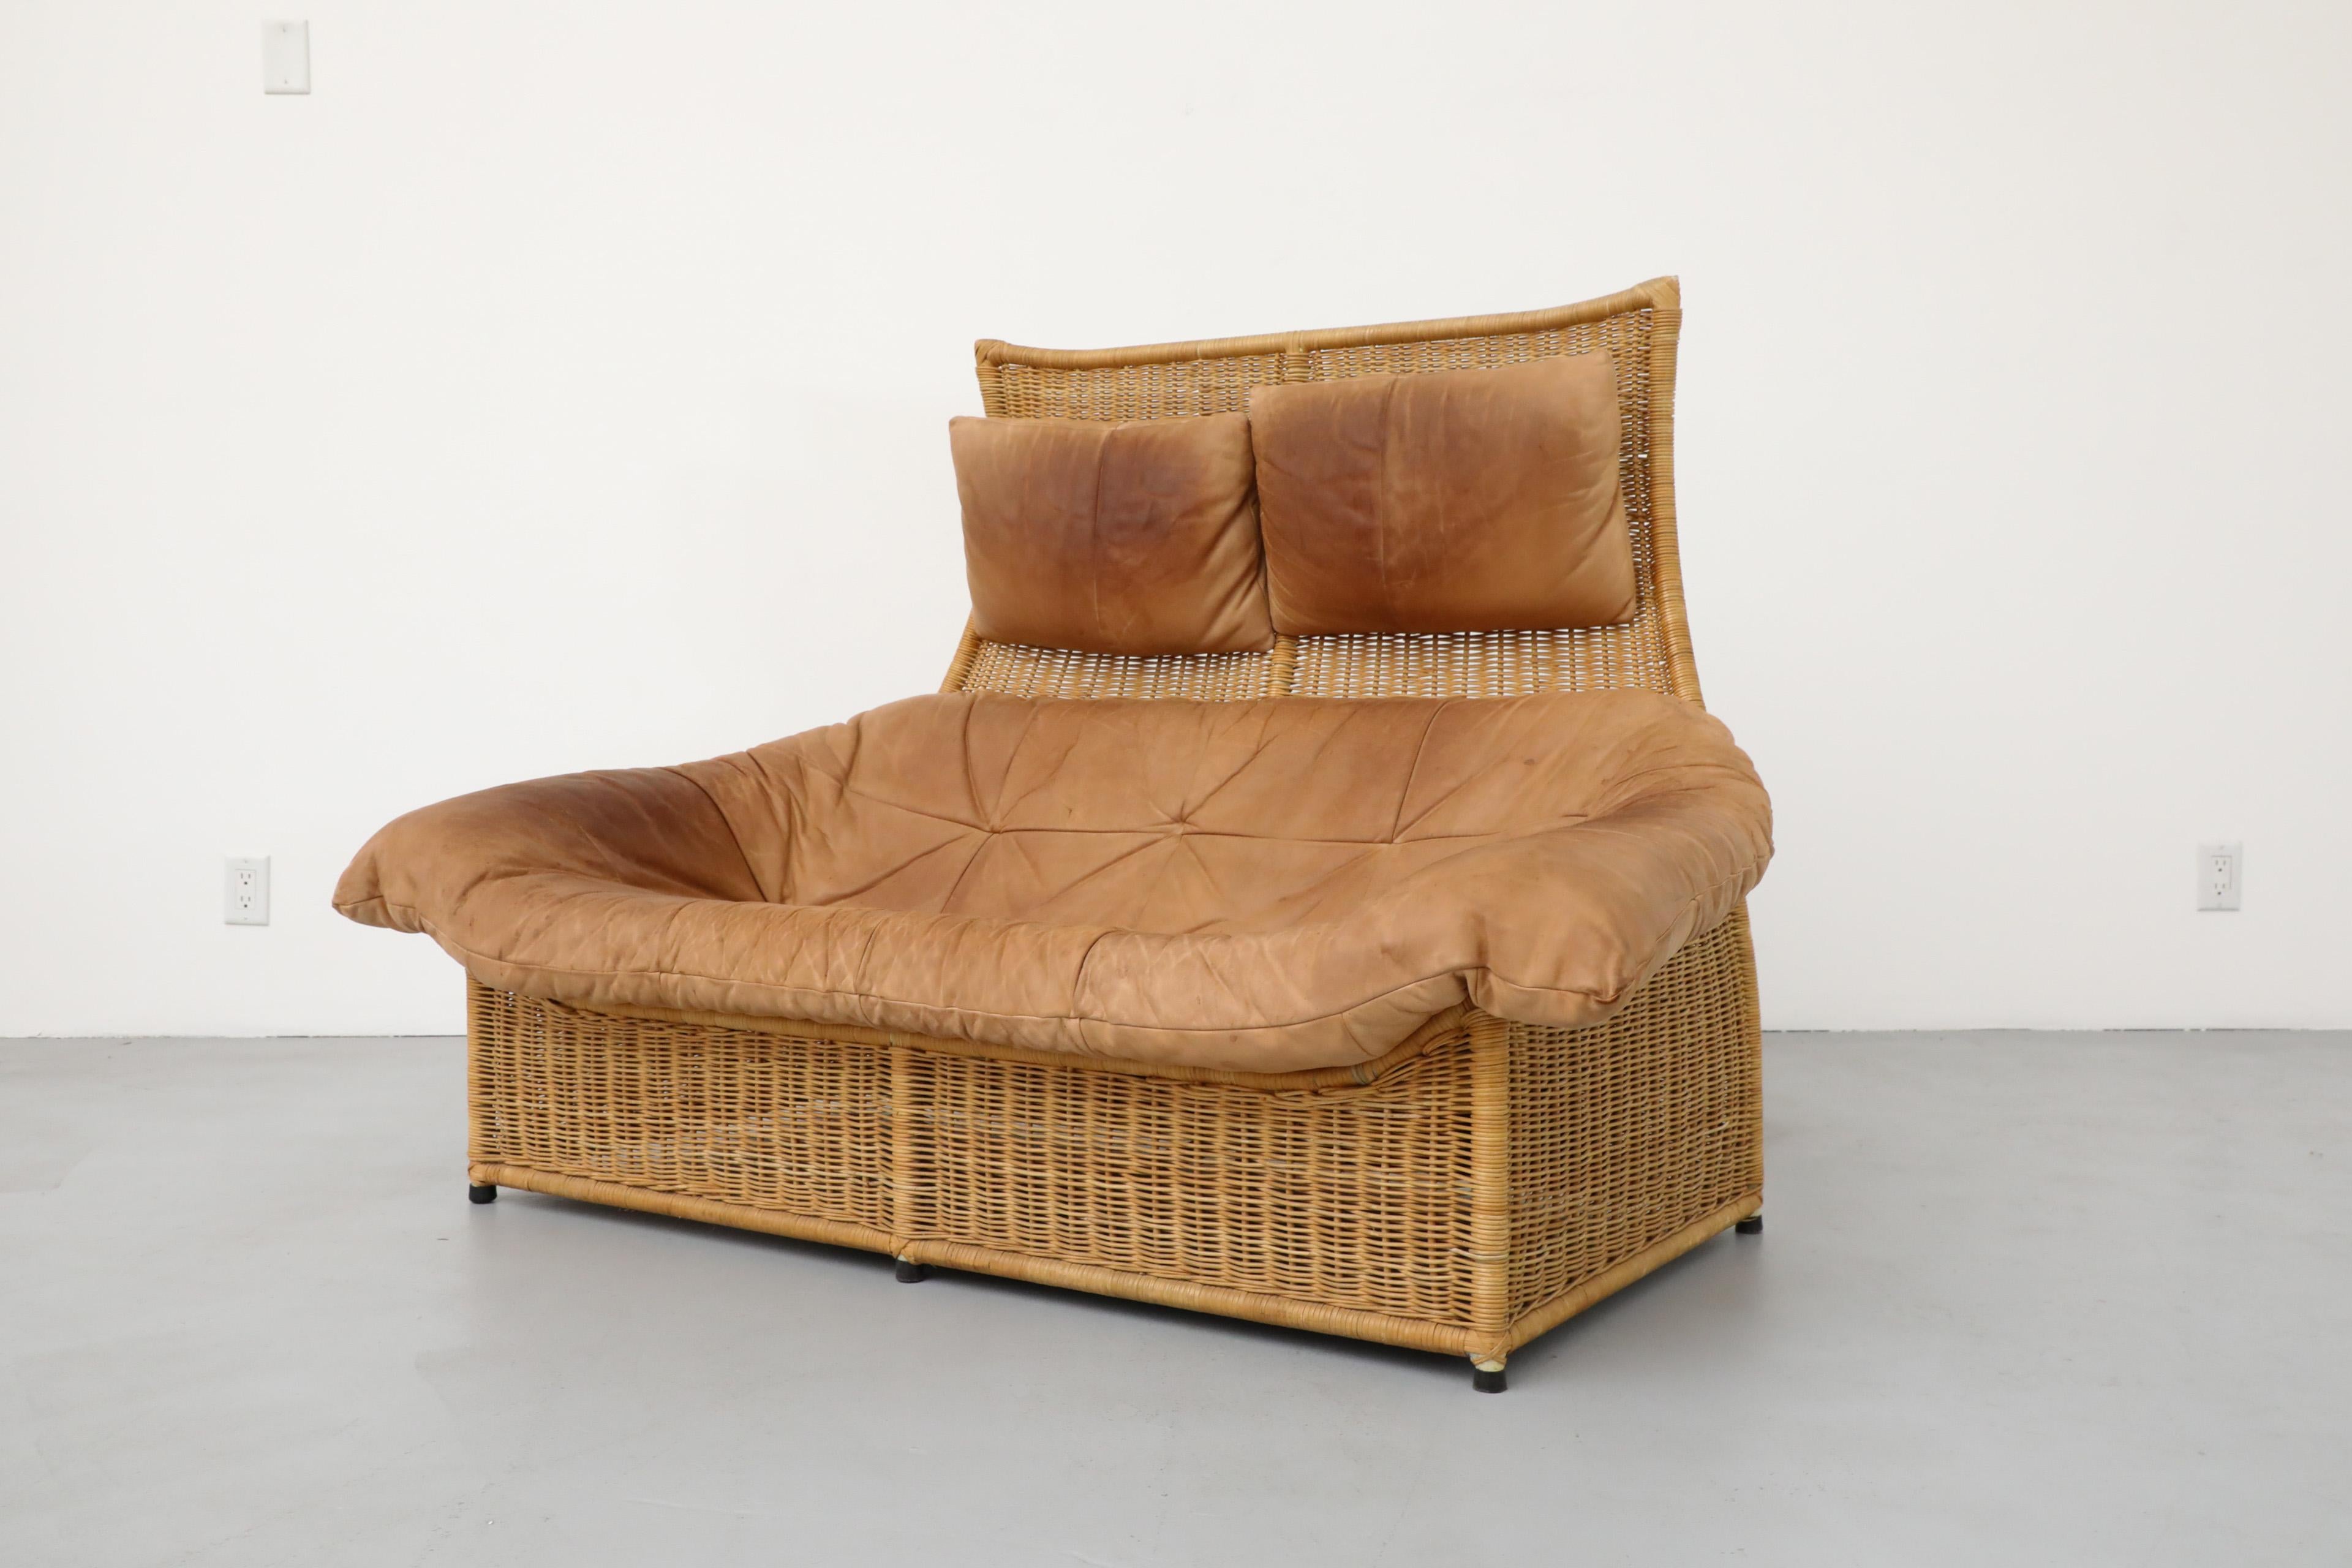 Beautiful loveseat with buck leather seating and hanging headrest pillows on a rattan frame designed by Gerard van den Berg for Montis. The leather has beautiful patina. In original condition including minor rattan breakage, discoloration and